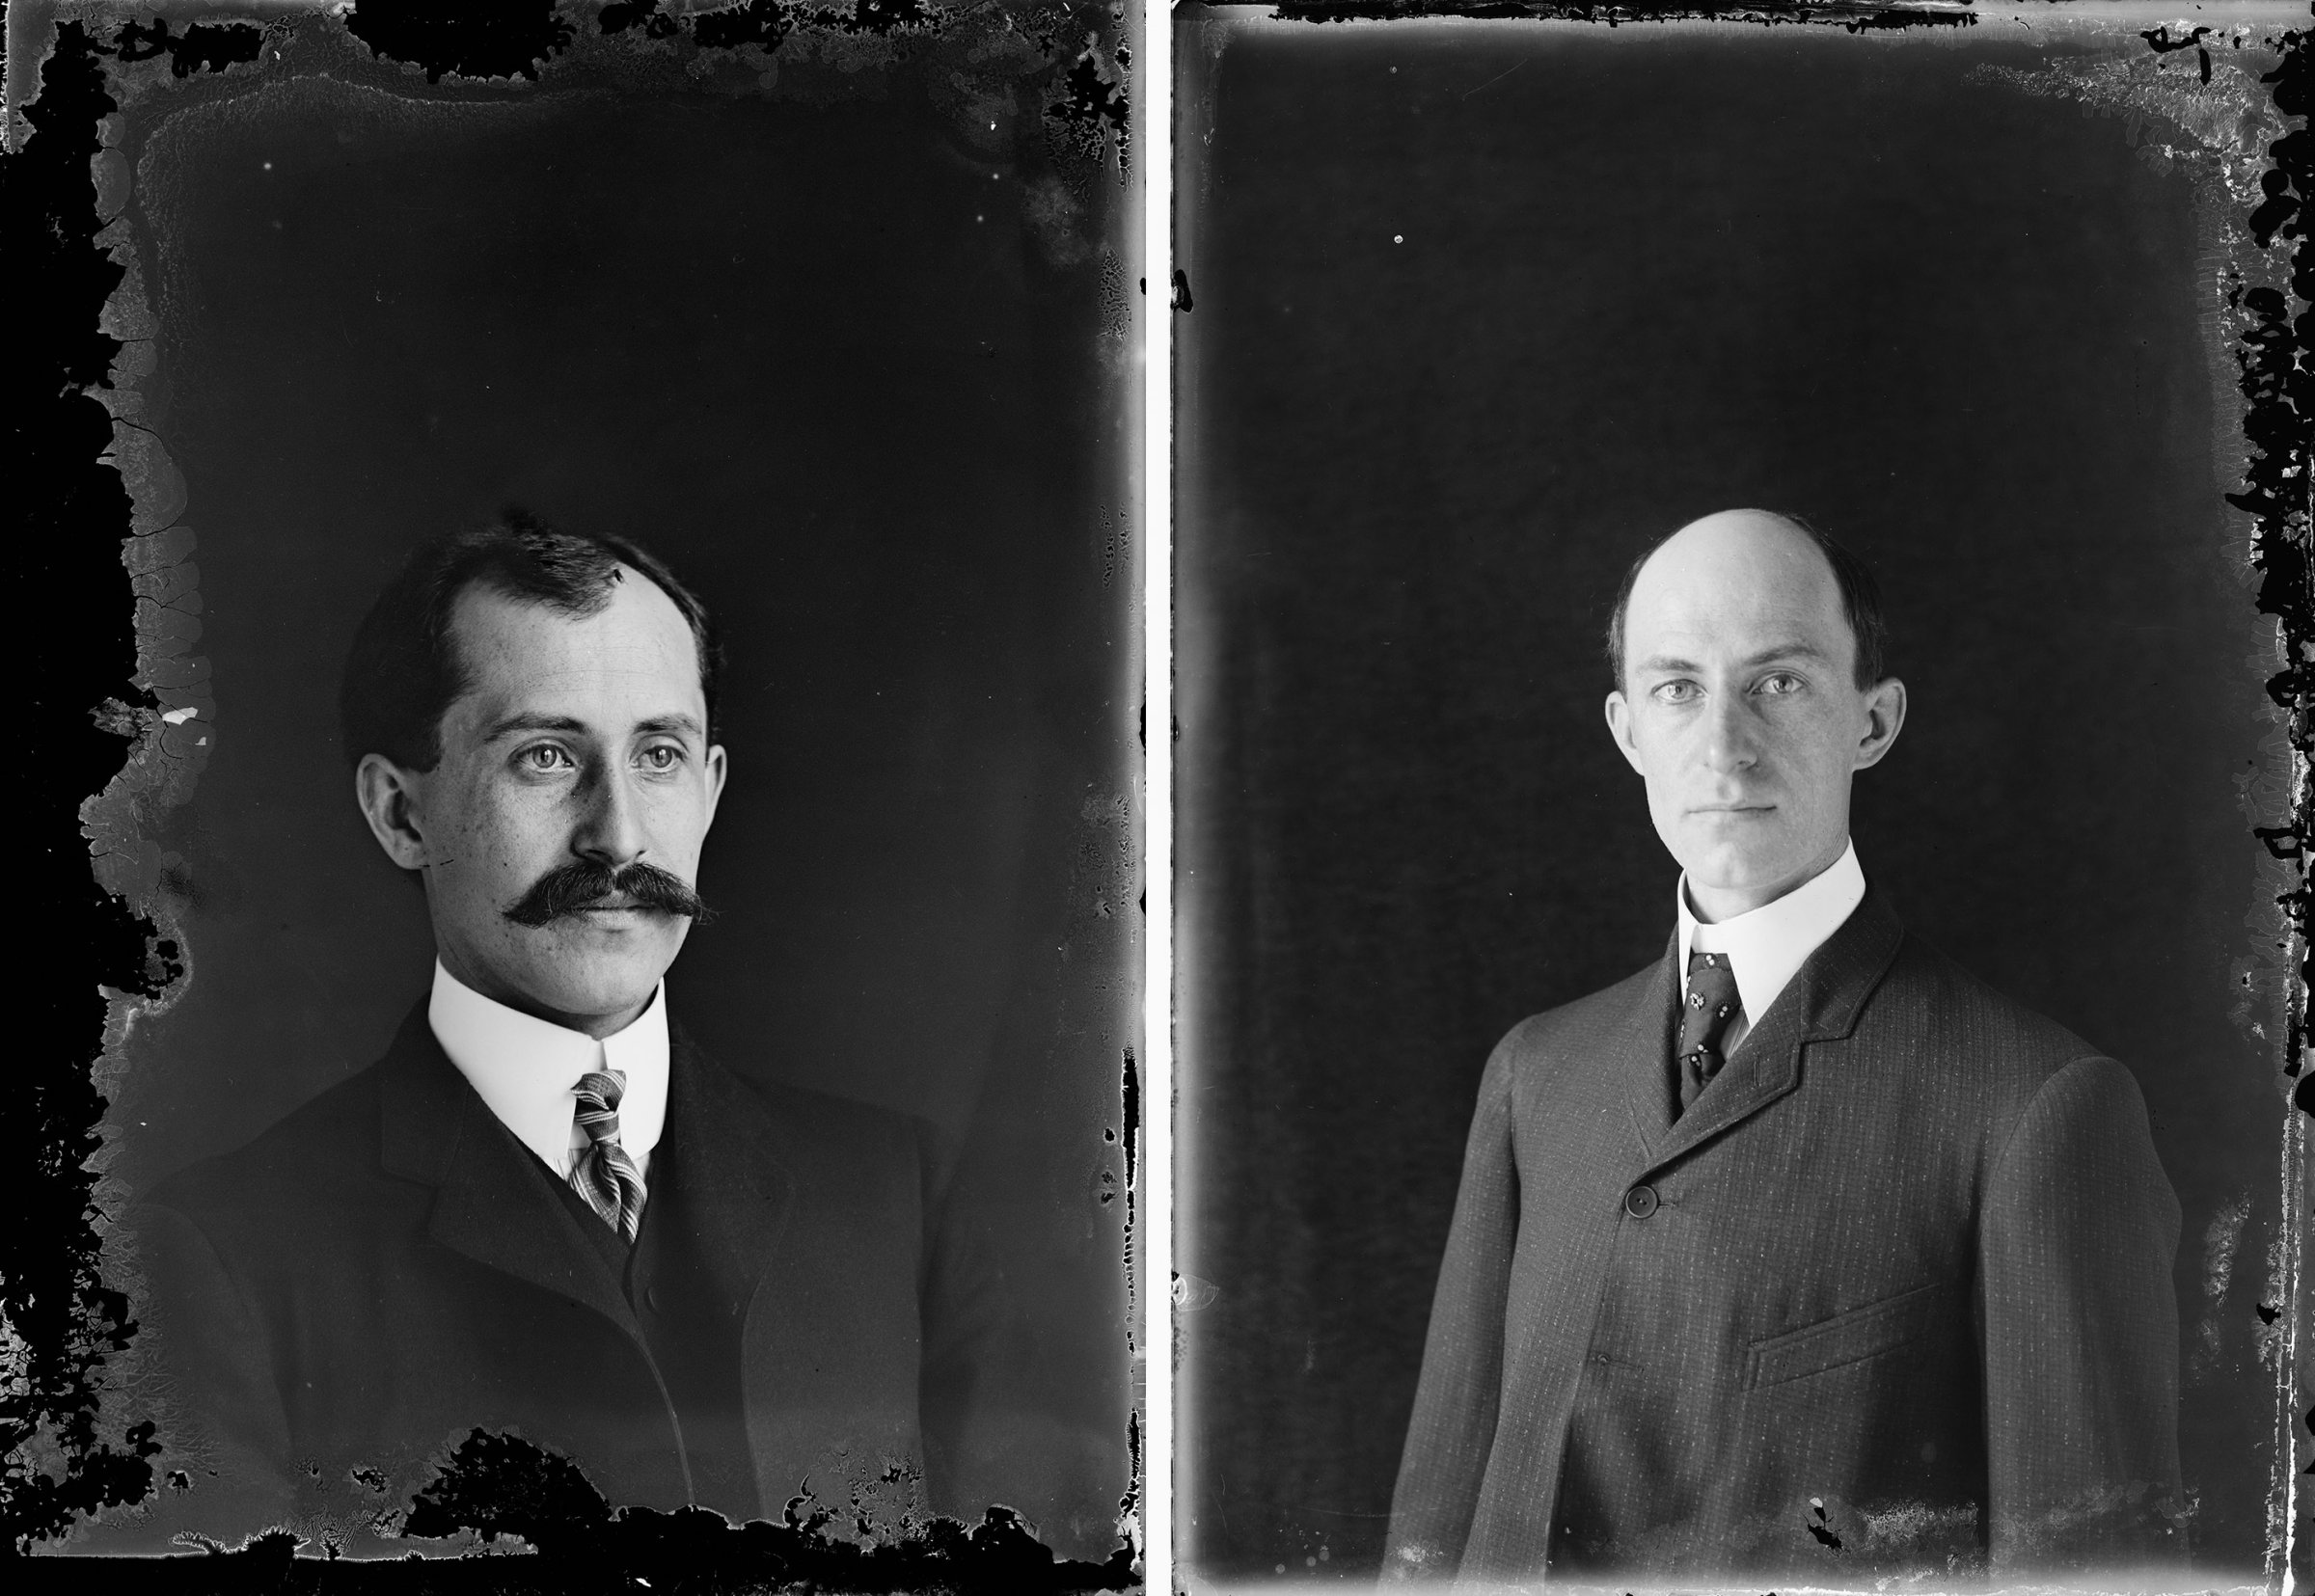 Dry plate, glass negatives from 1905 of Orville Wright at age 34 and Wilbur Wright at 38.